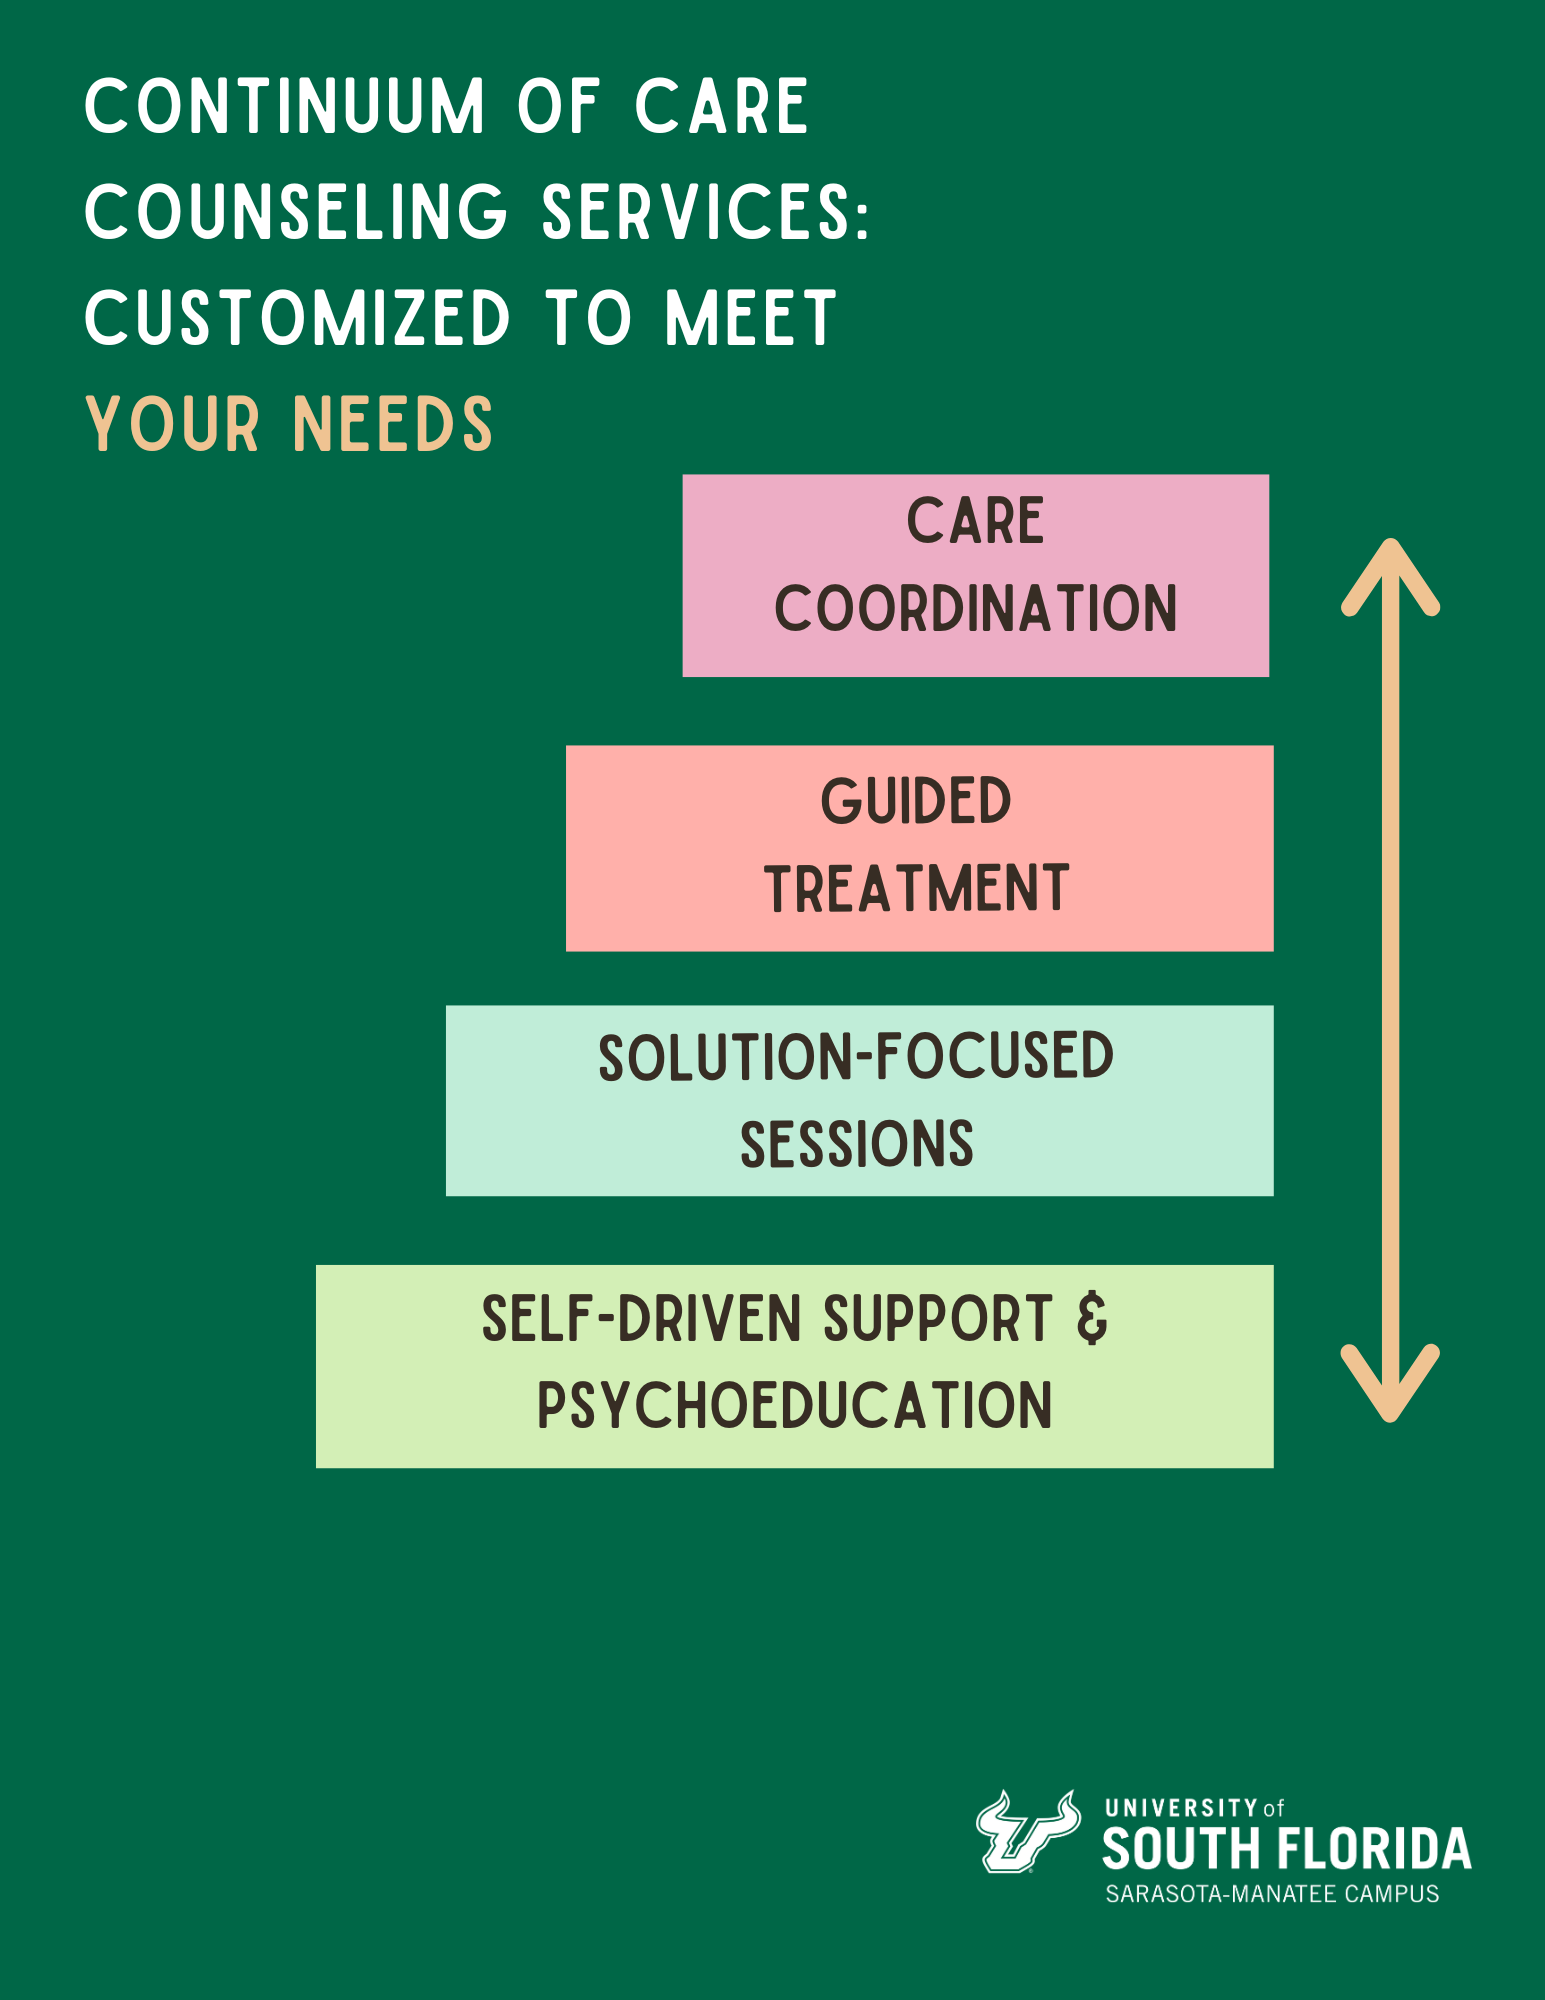 Counseling Services Chart